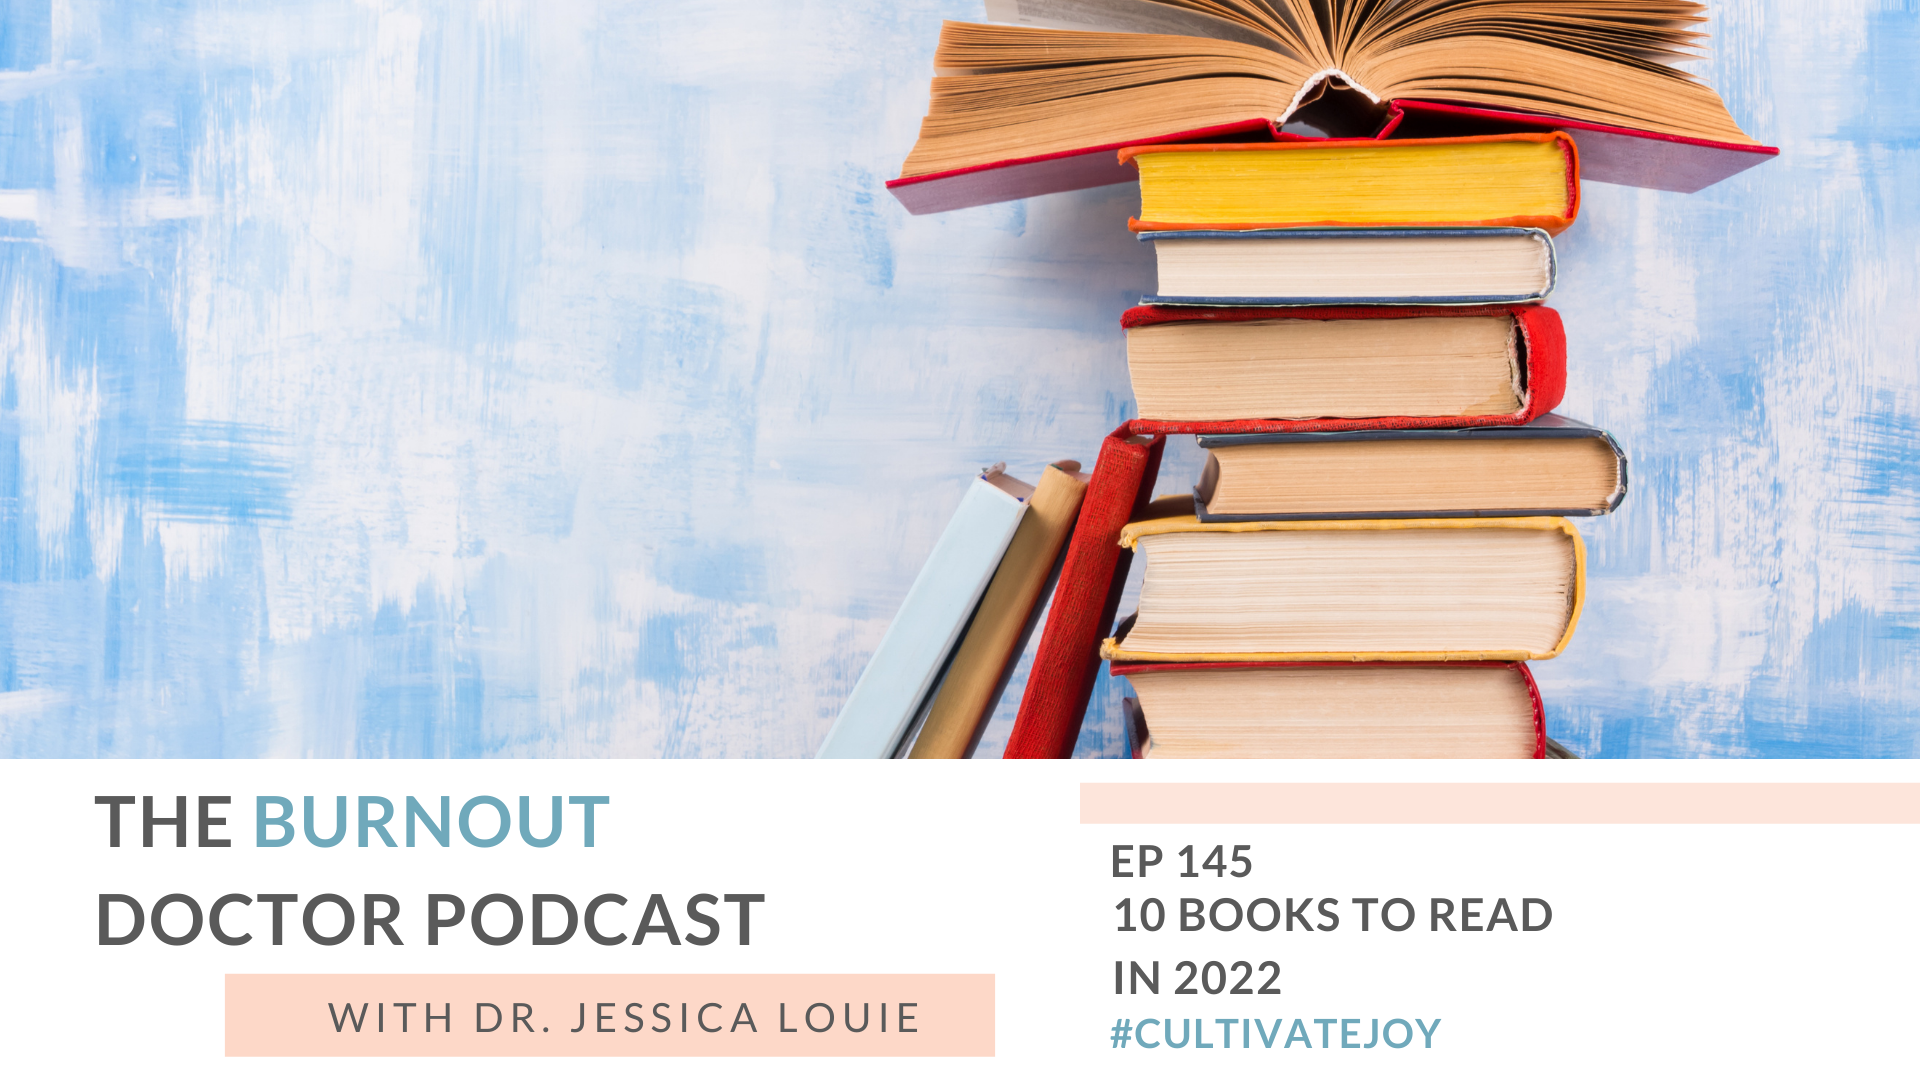 10 books to read in 2022. What to read in new year. FAT FIRE pharmacist books. Kakeibo method books. Dr. Jessica Louie. The Burnout Doctor Podcast.